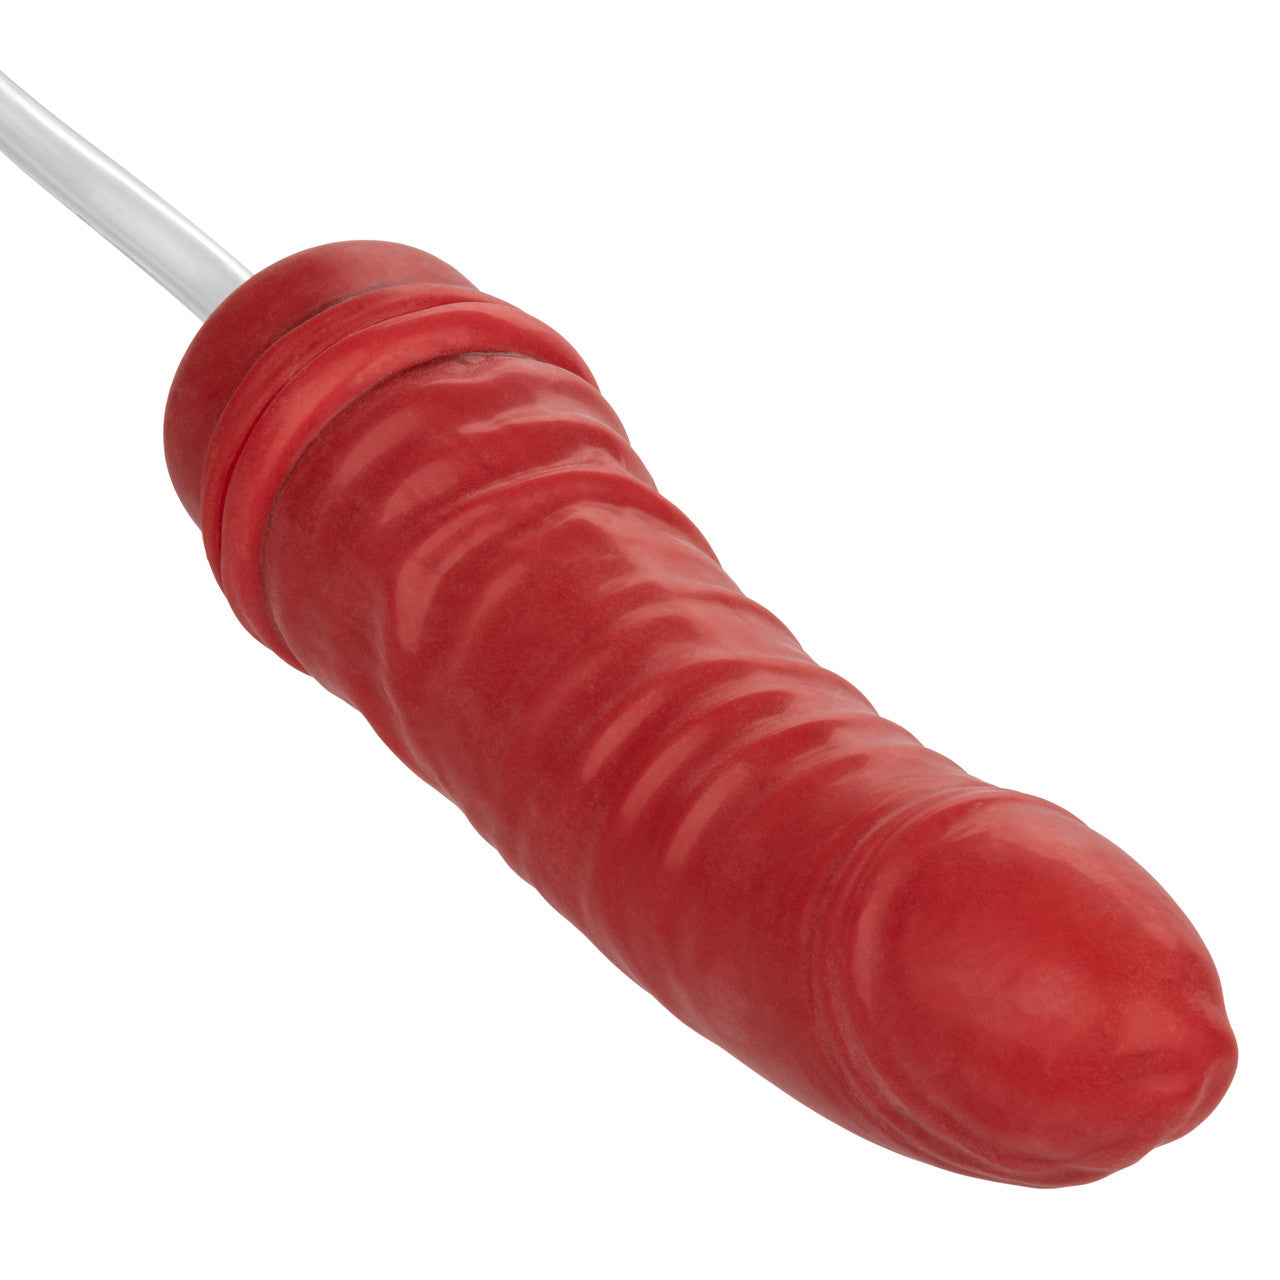 Colt Hefty Probe Inflatable Butt Plug - Red - Thorn & Feather Sex Toy Canada